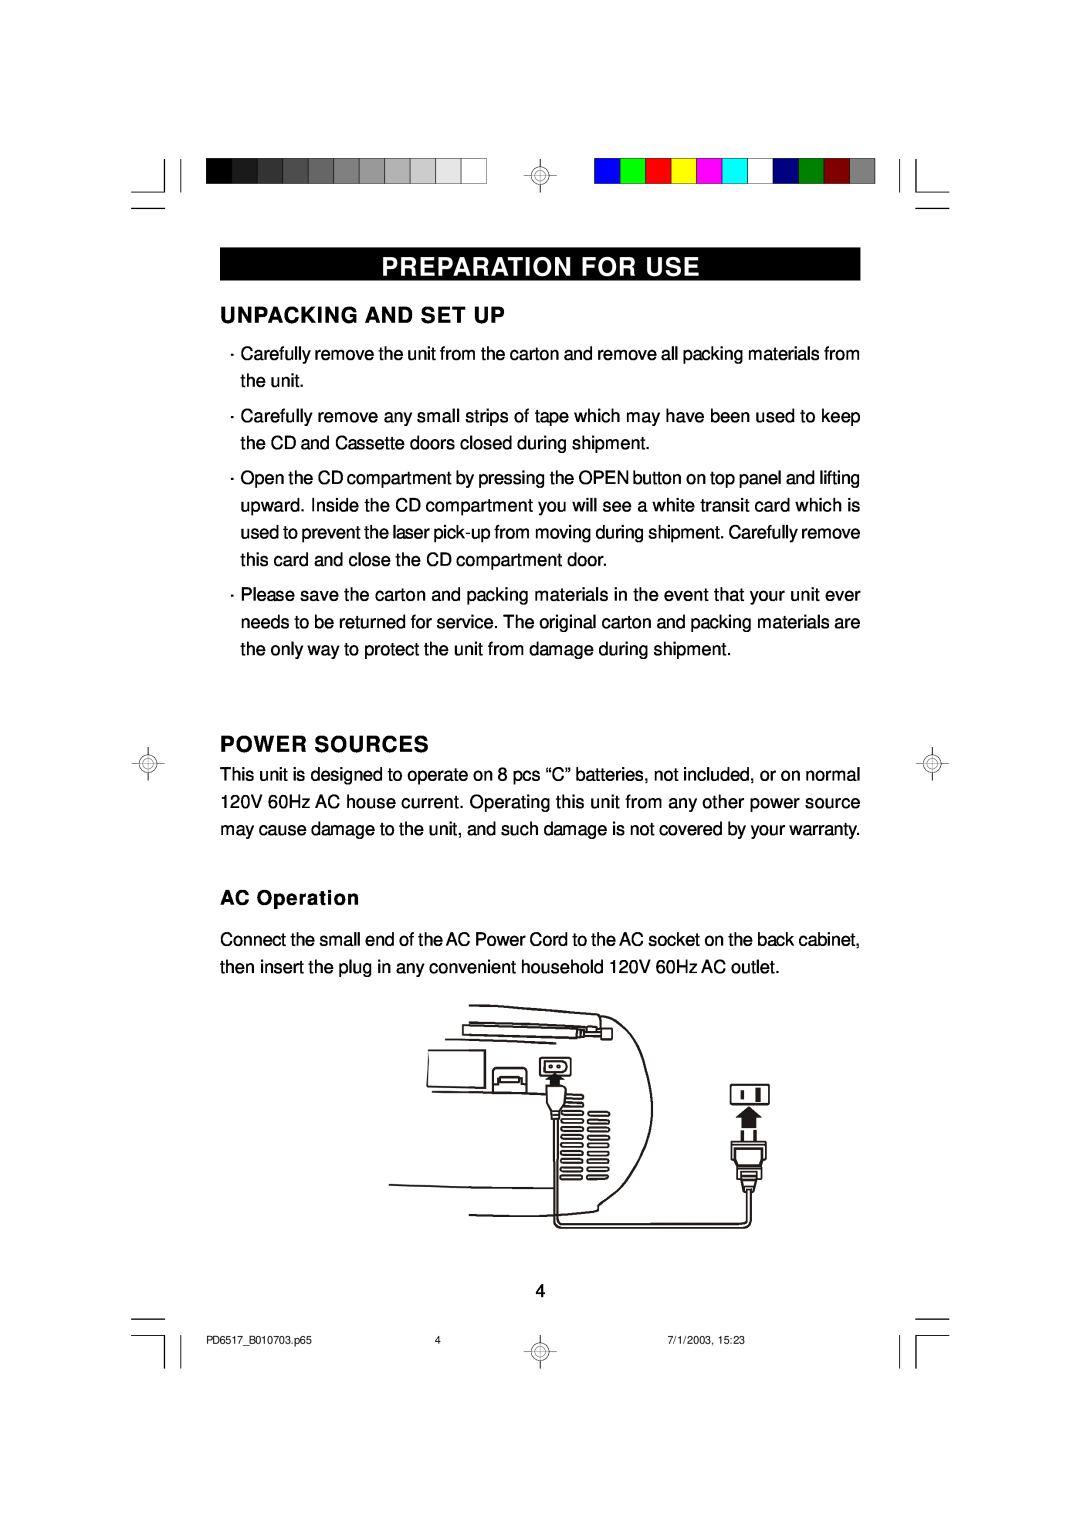 Emerson PD6517 owner manual Preparation For Use, Unpacking And Set Up, Power Sources, AC Operation 